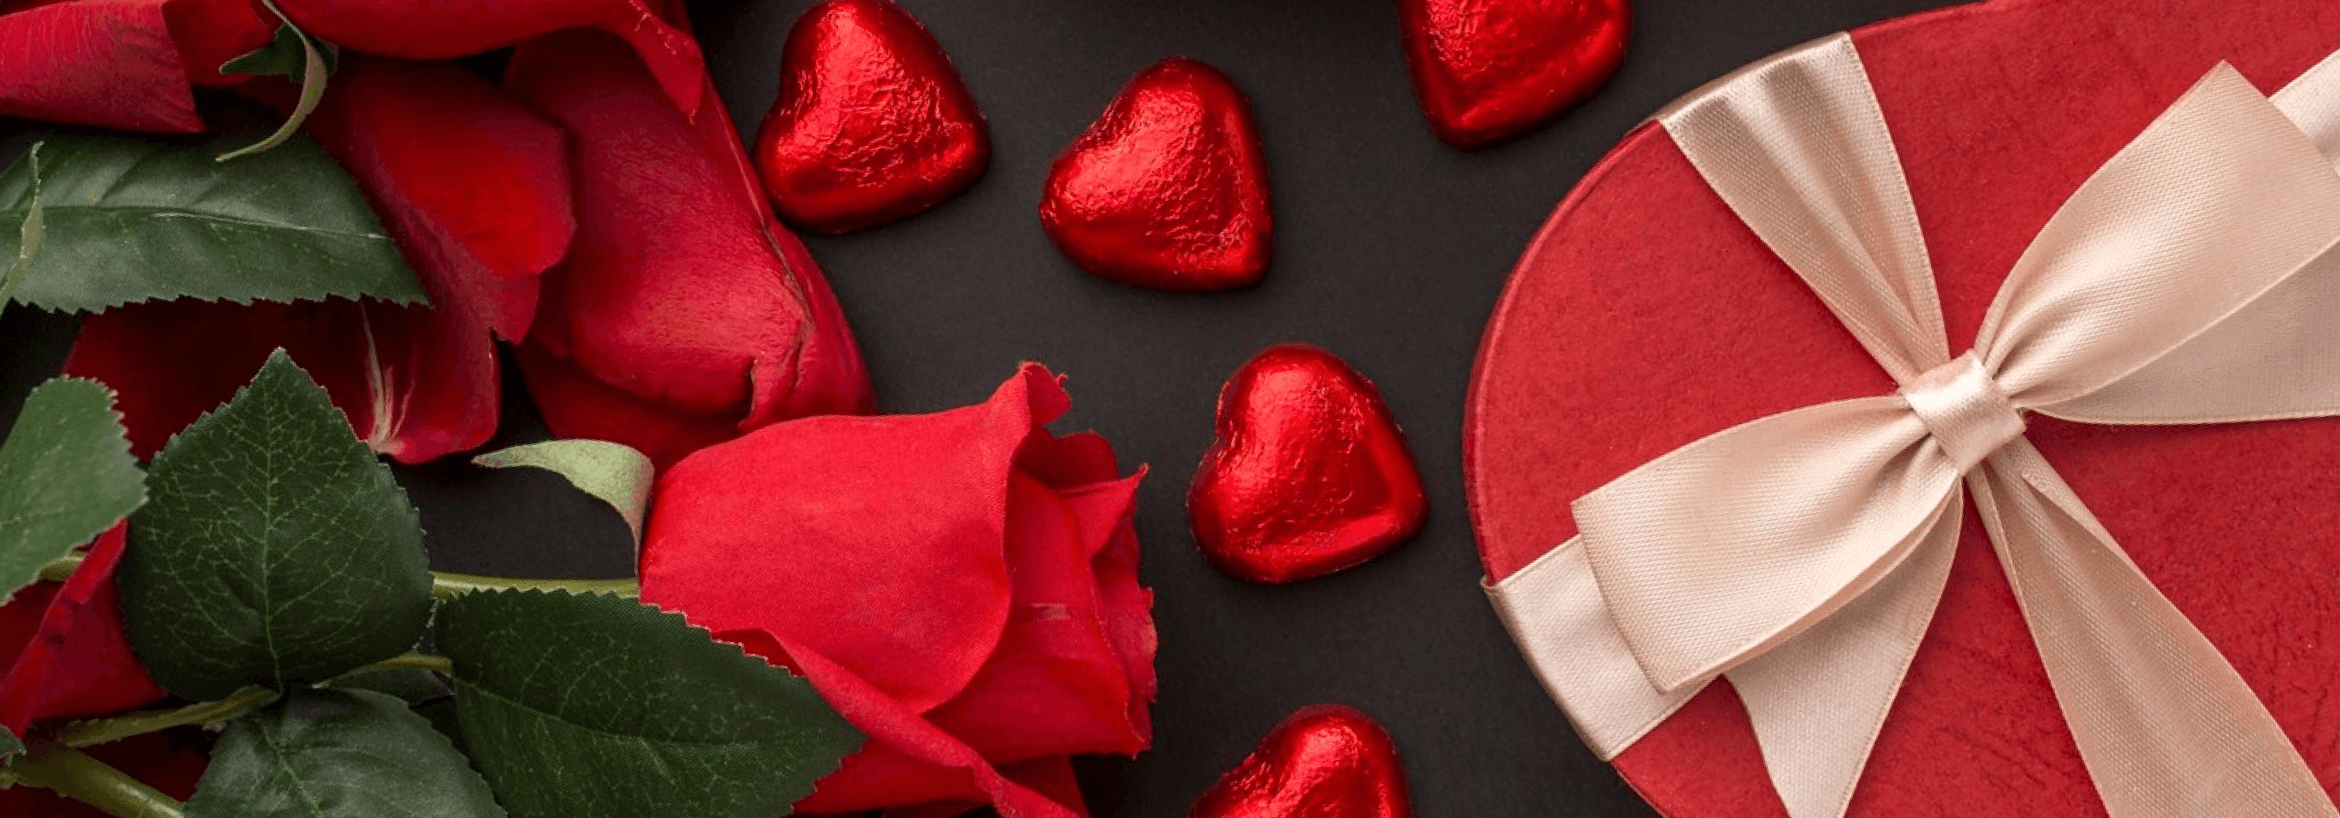 Show Your Love with These Valentine's Day Gifts